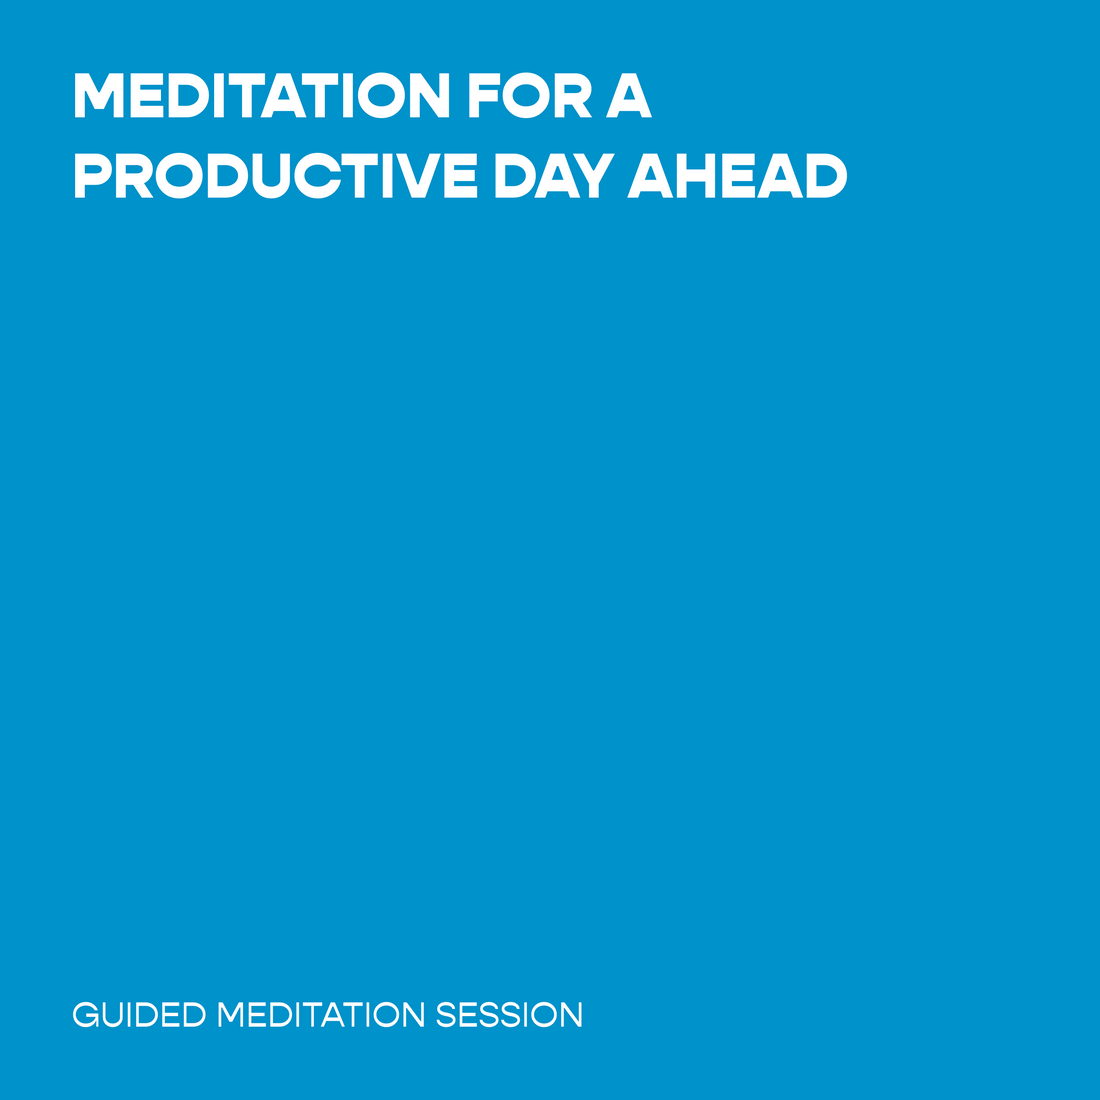 Meditation for a Productive Day Ahead